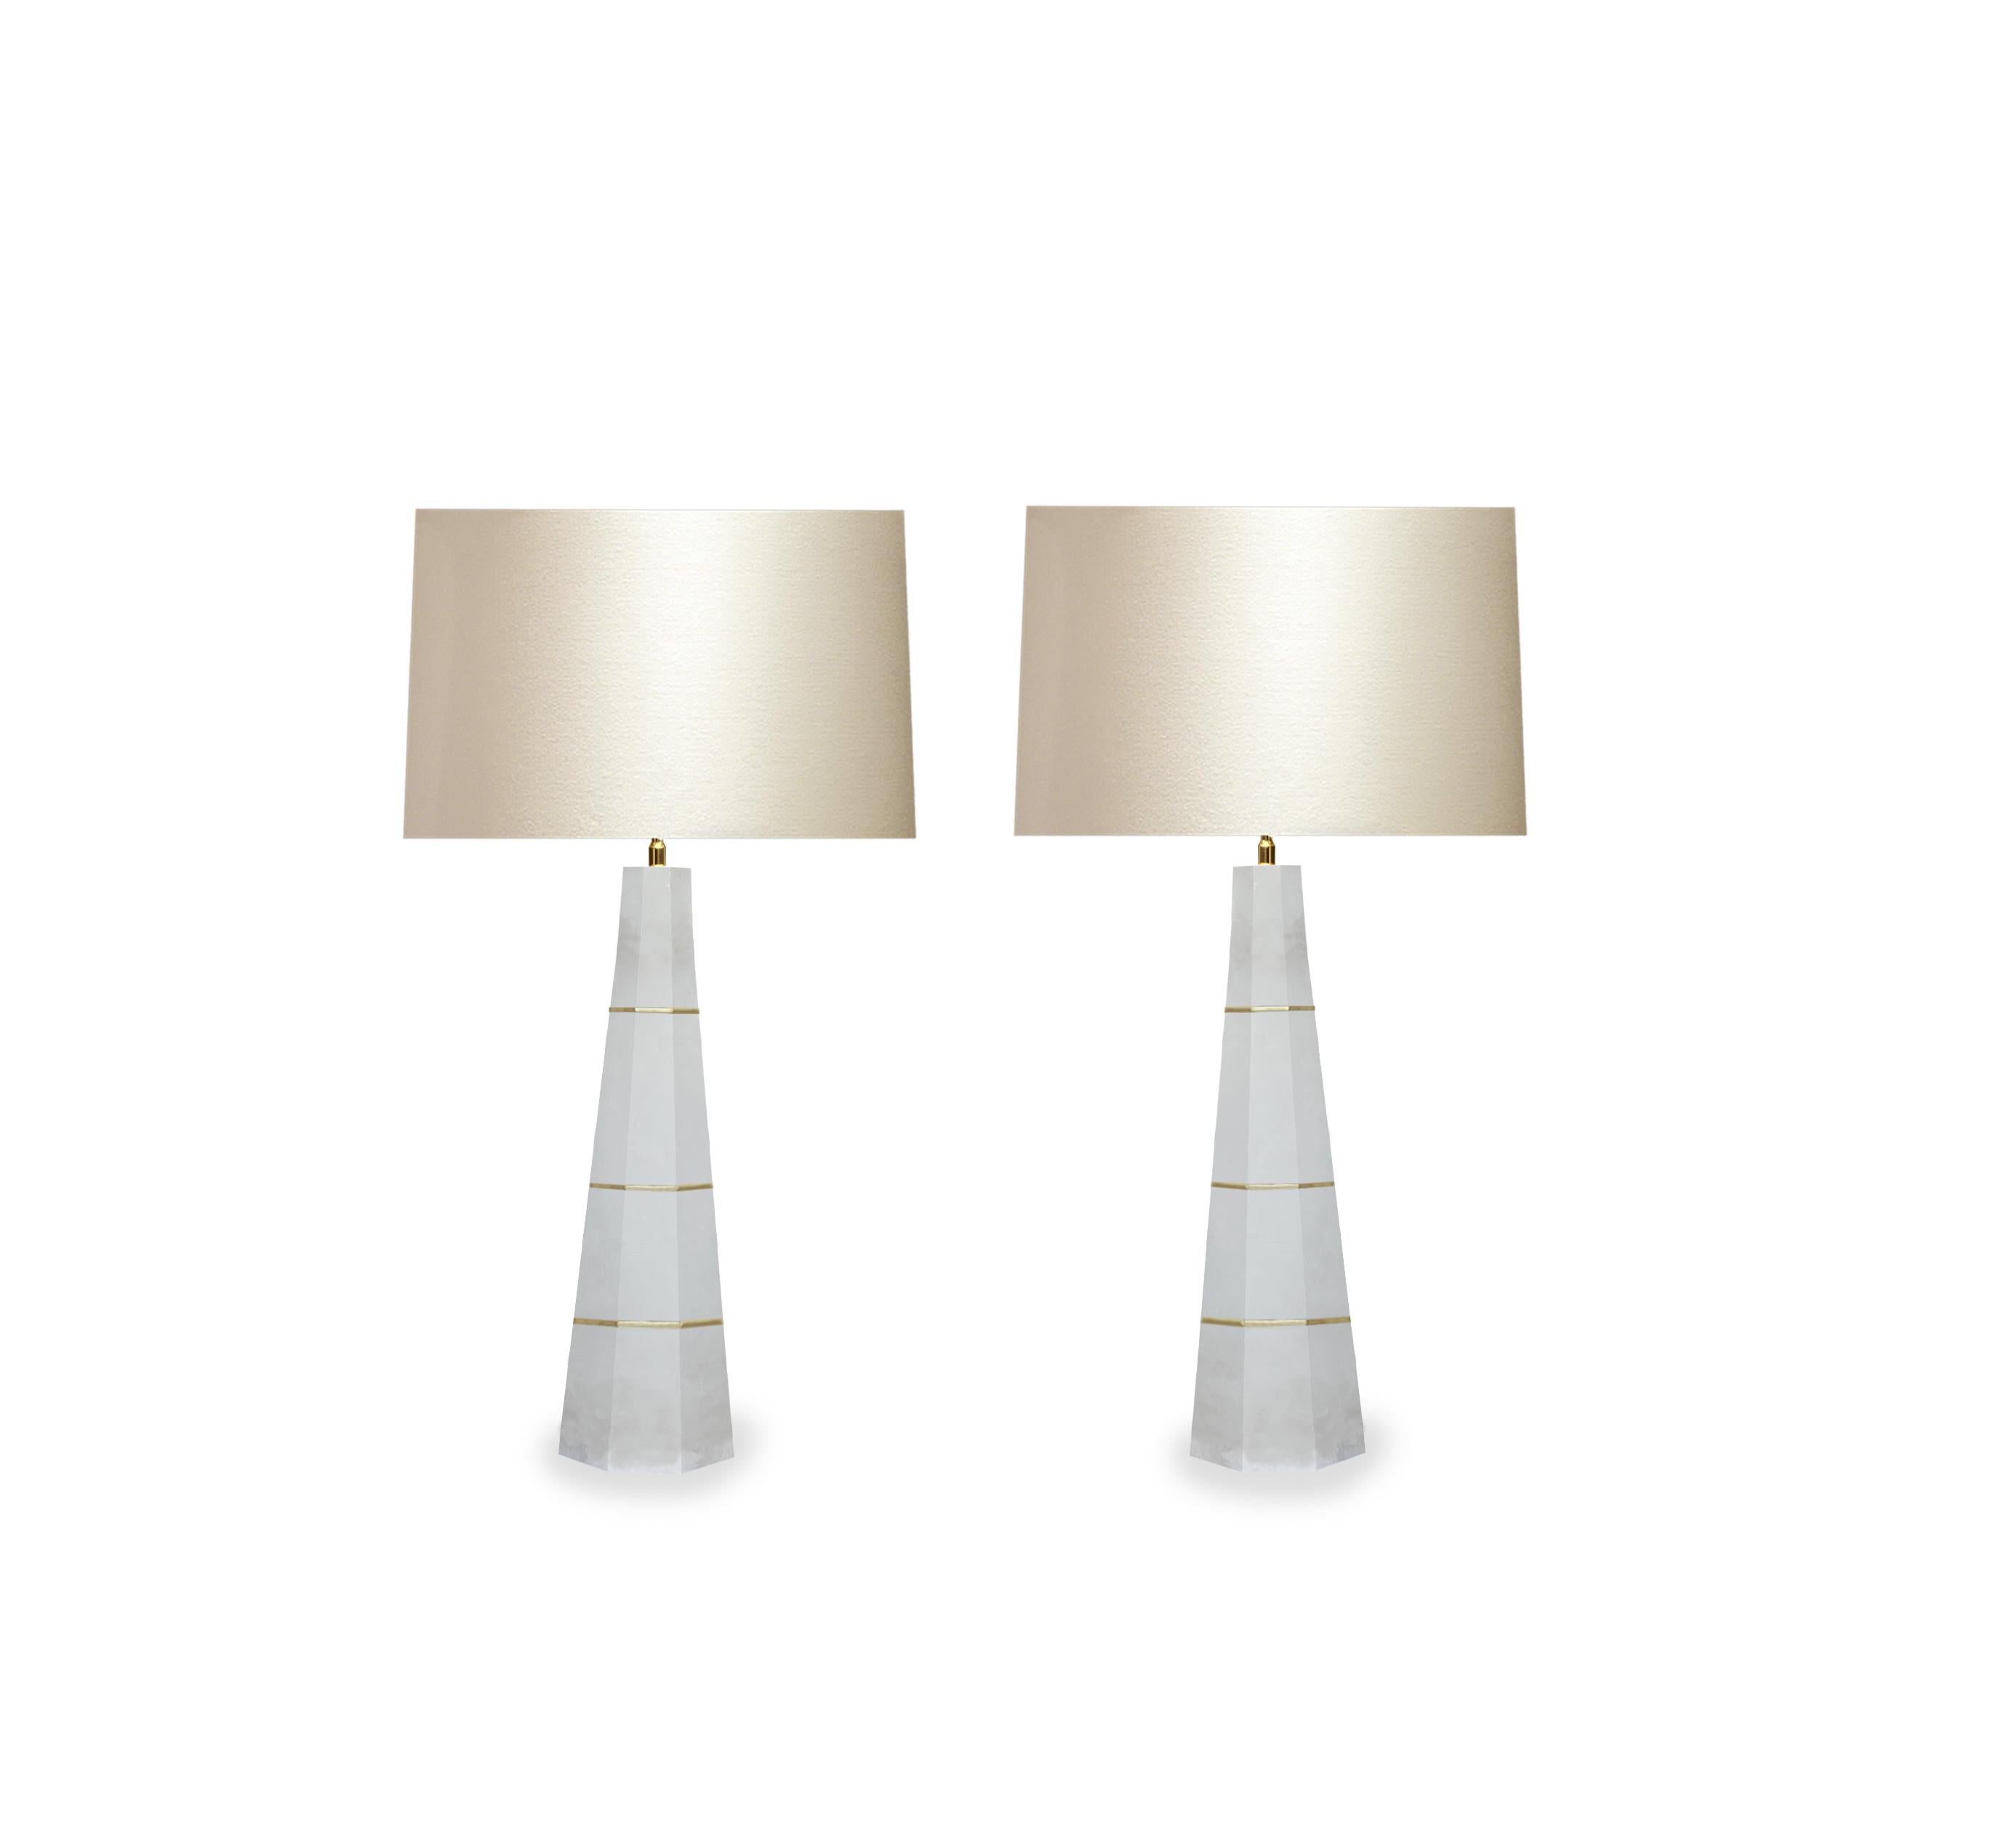 Pair of column rock crystal quartz lamps with polished brass decoration. Created by Phoenix Gallery, NYC.
Measure: To the top of rock crystal: 21.5